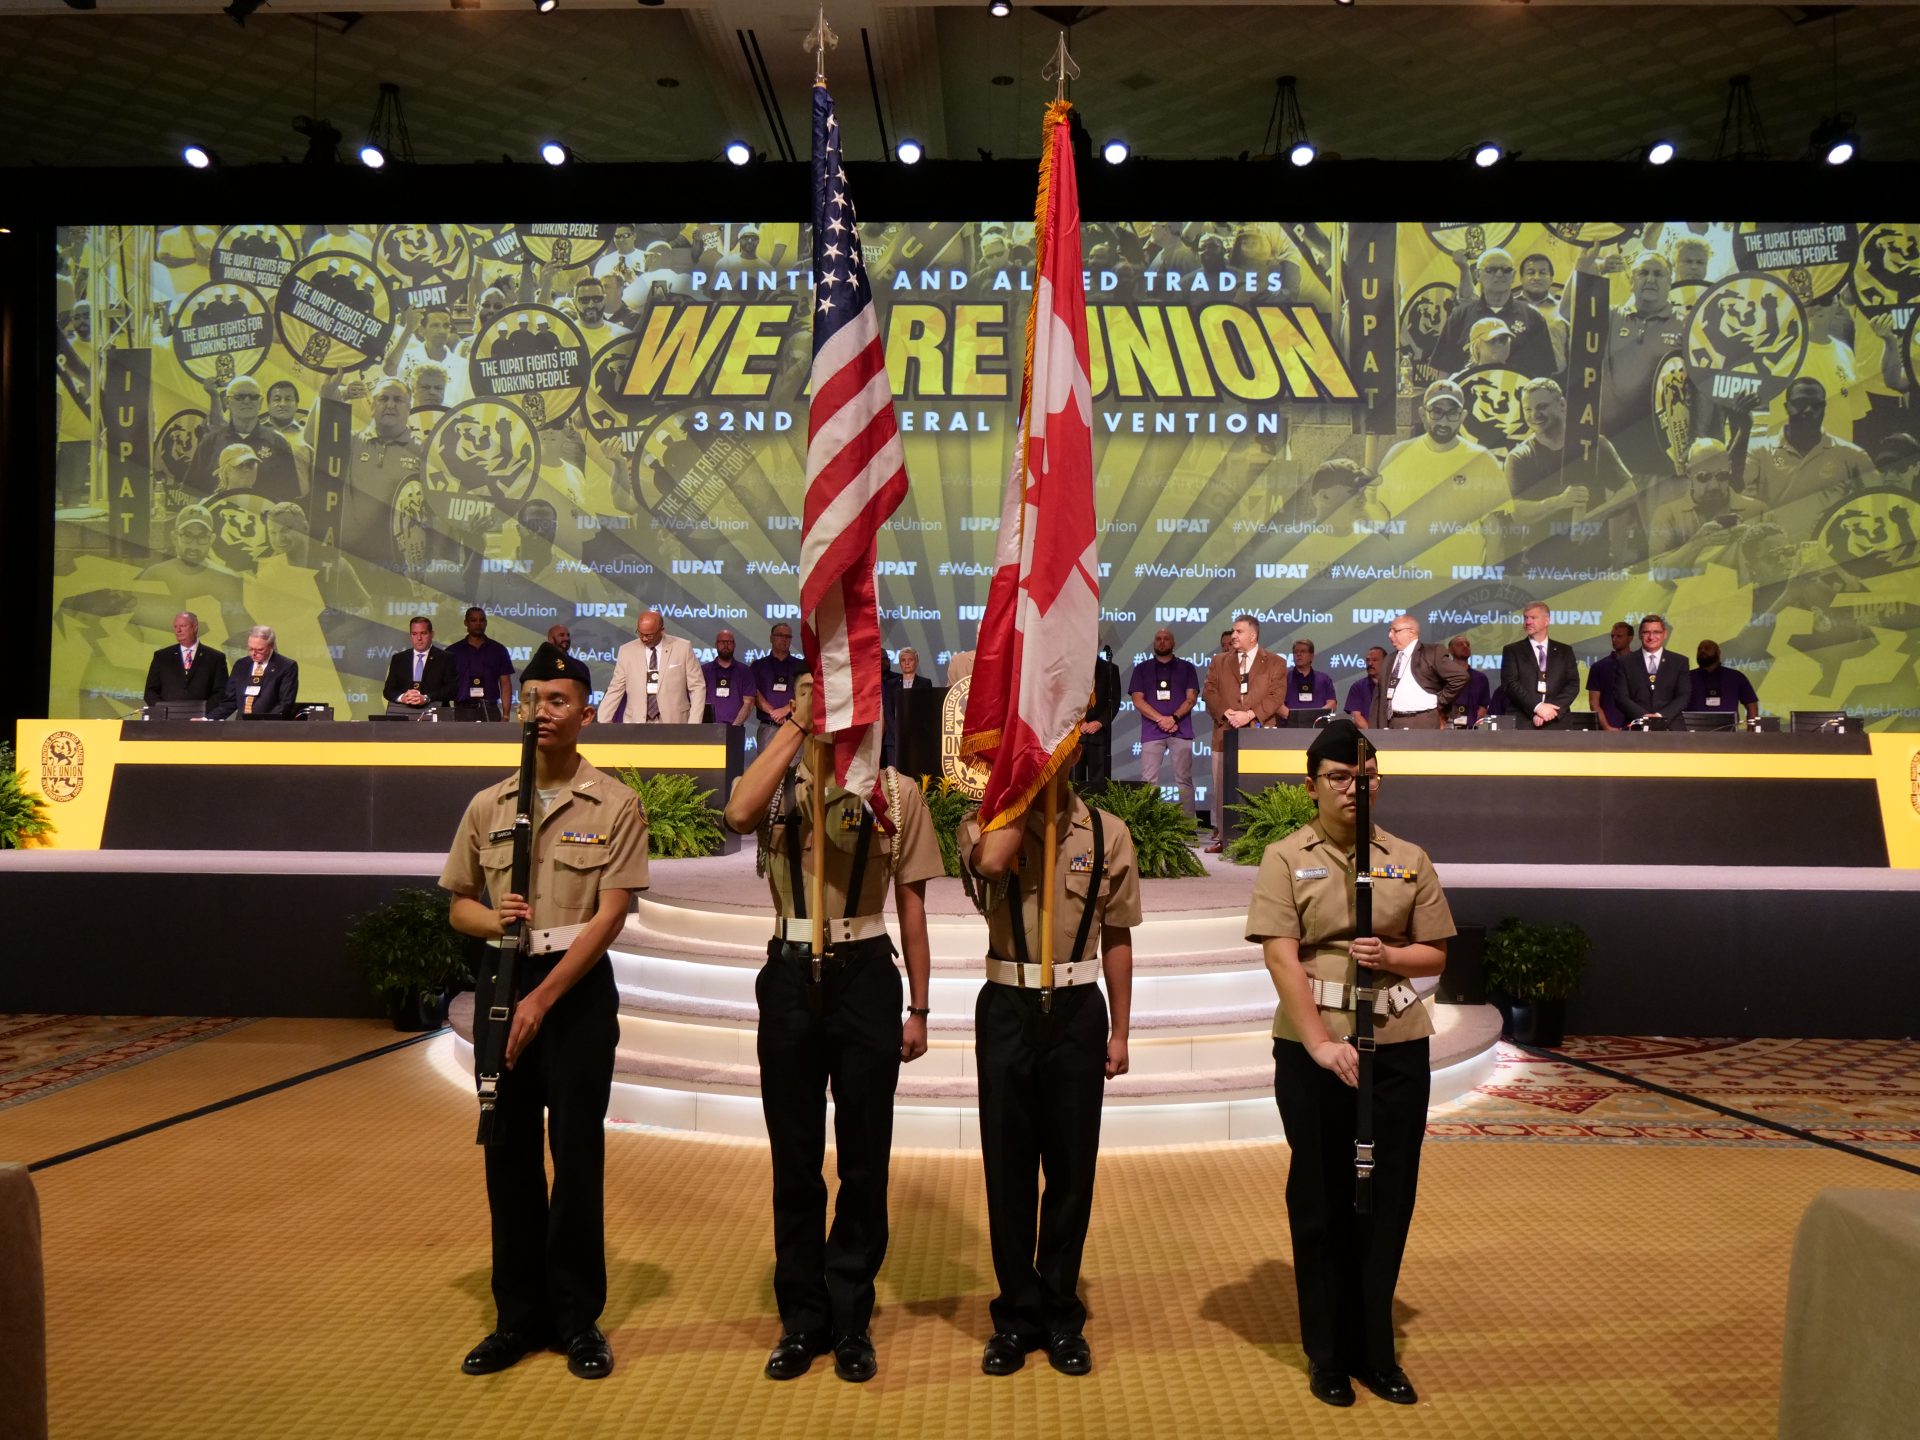 Image from the Gallery: 32nd General Convention – Las Vegas, NV